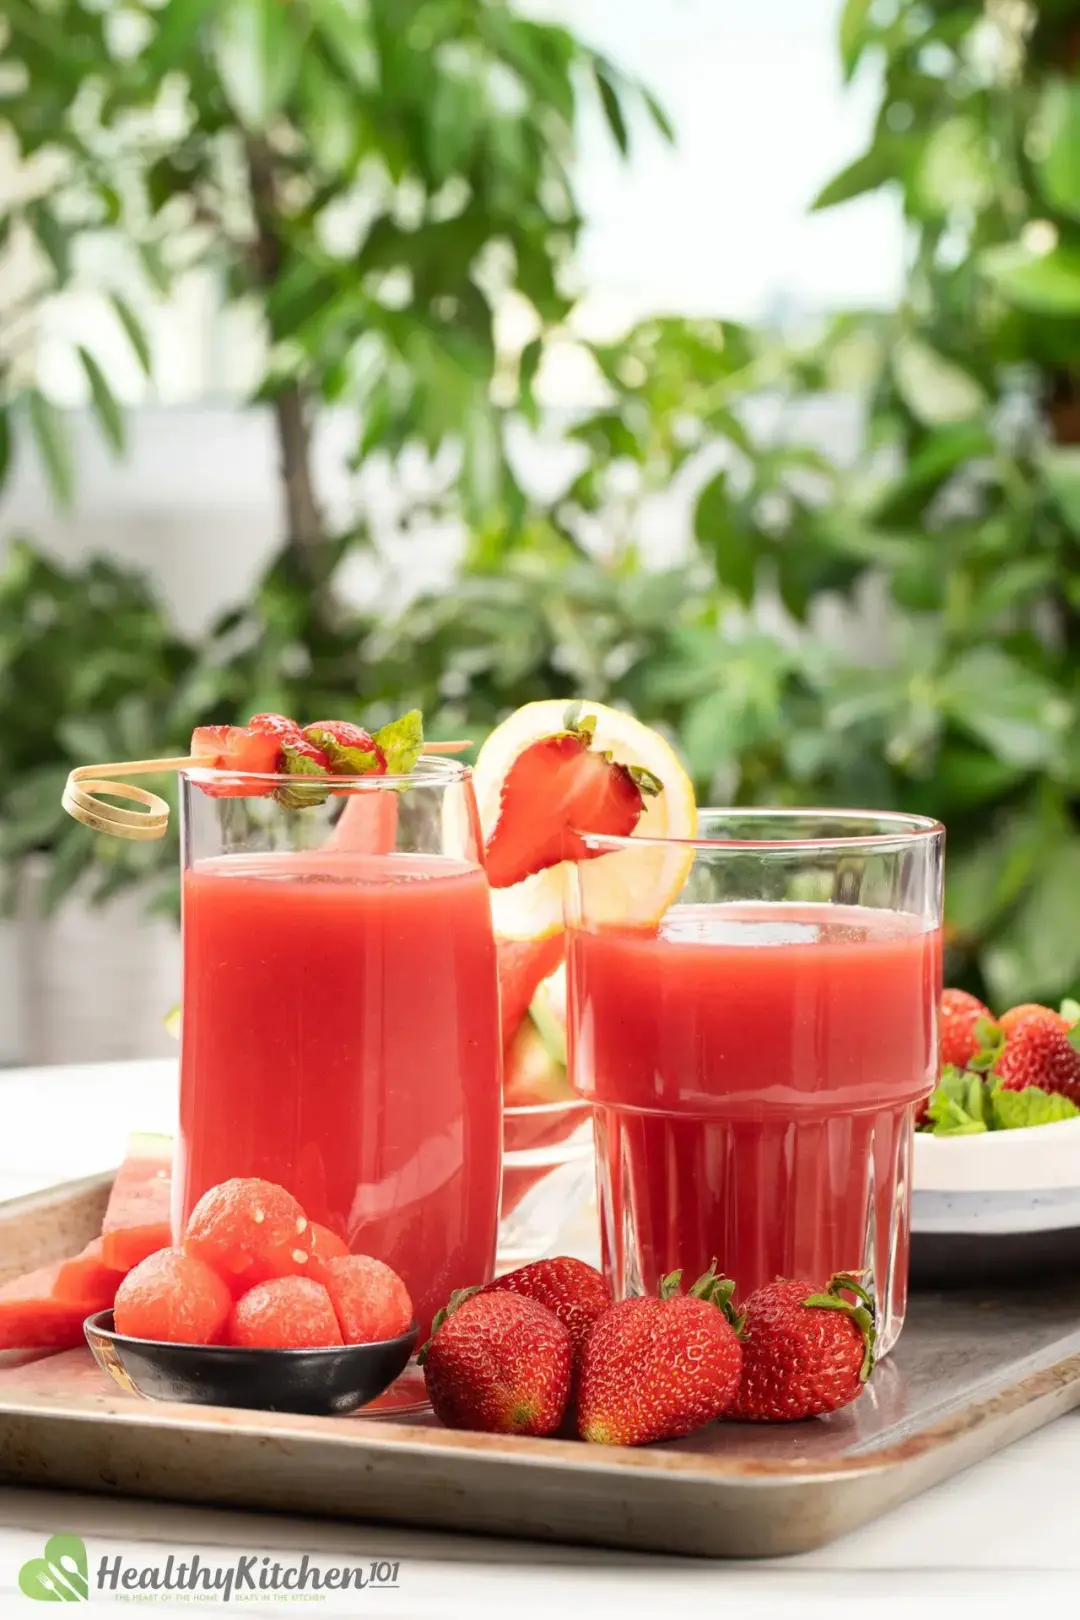 Two glasses of red juice in a steel tray with strawberries, lemon, and watermelon as decorations